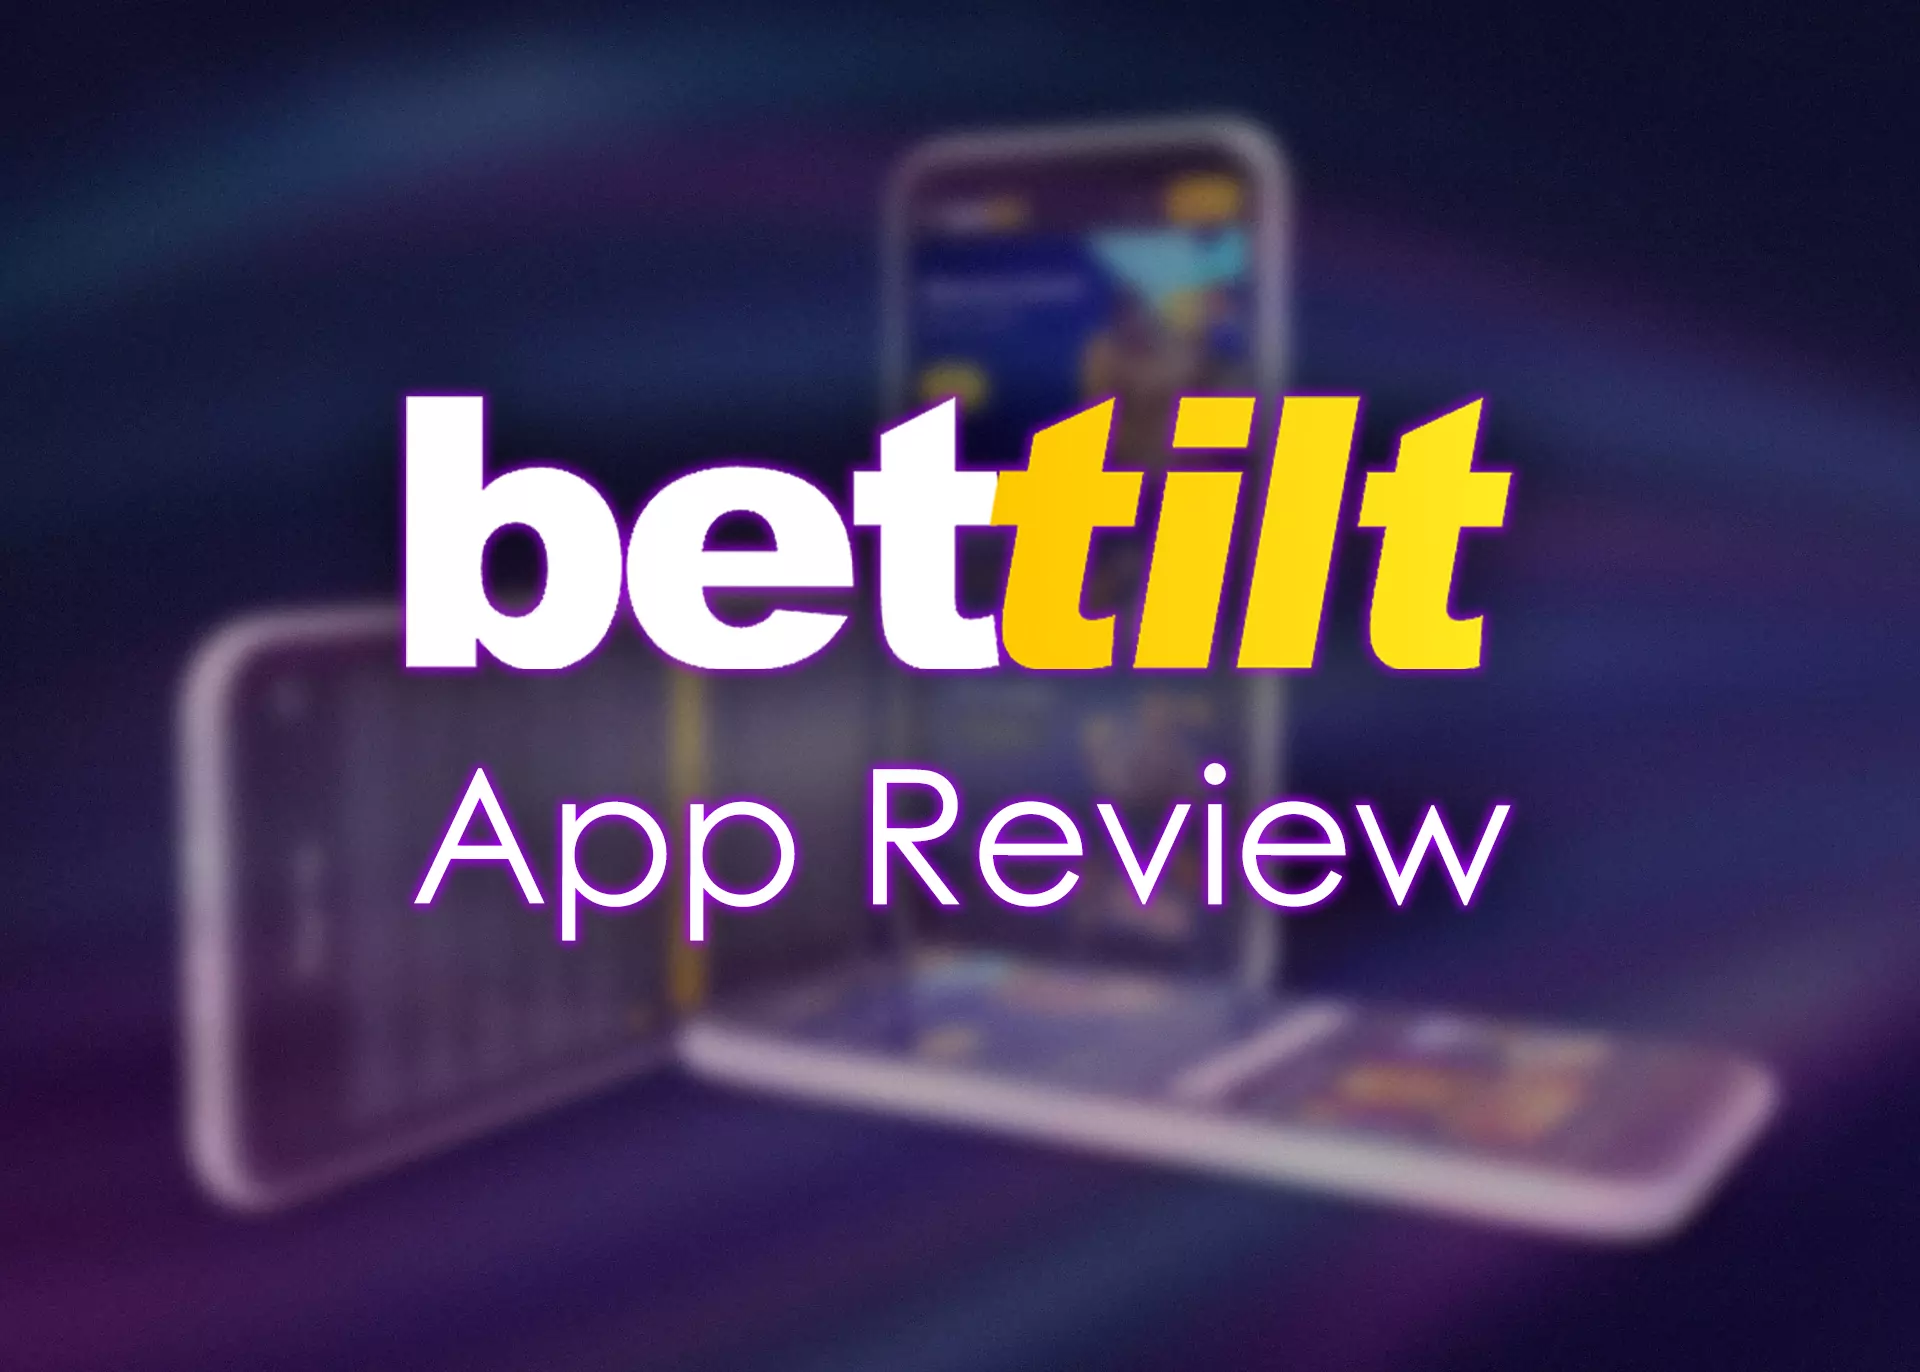 In this article, we share the review about using the Bettilt app for betting and playing casino games.